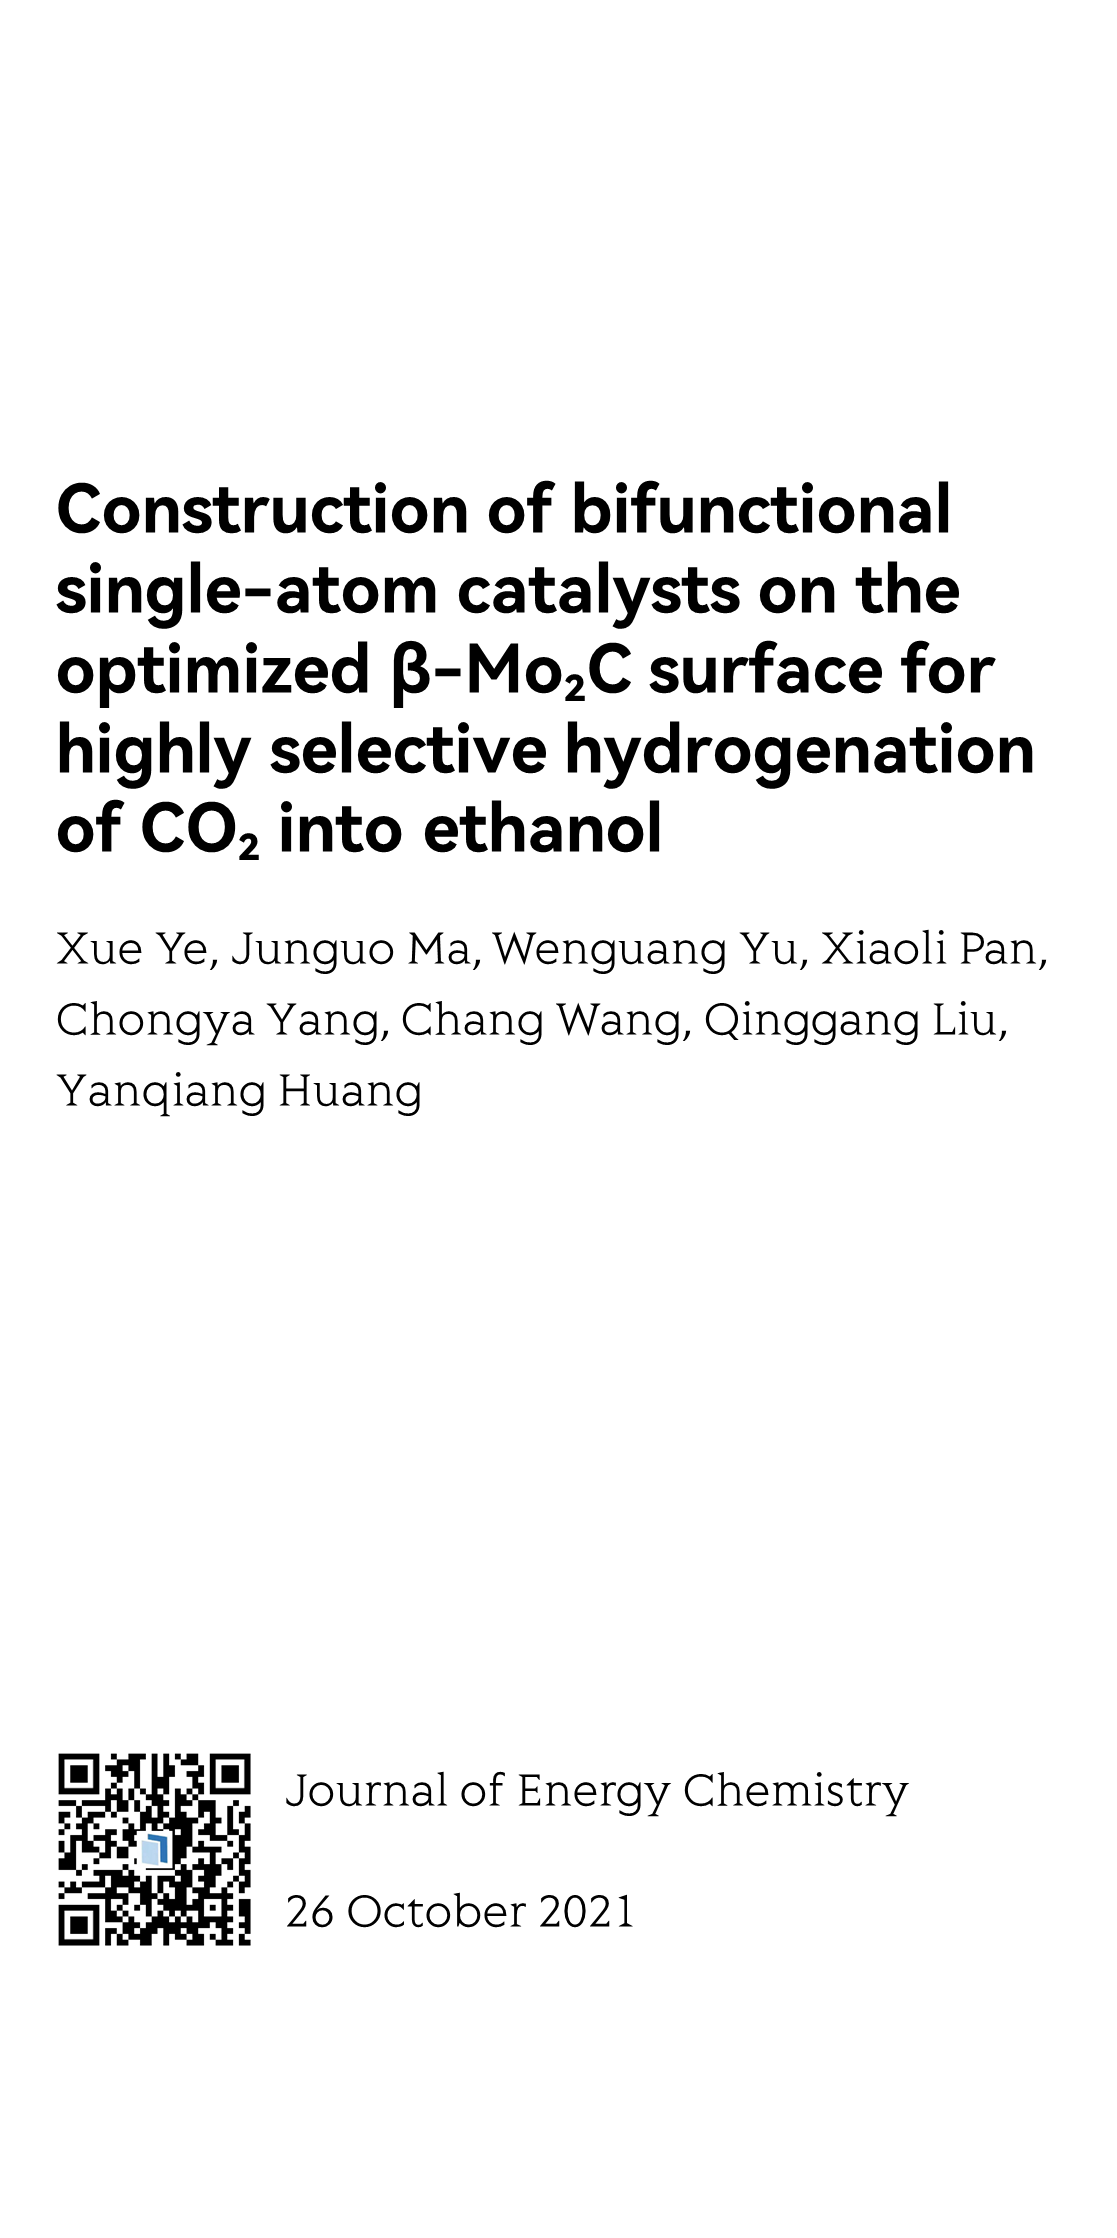 Construction of bifunctional single-atom catalysts on the optimized β-Mo₂C surface for highly selective hydrogenation of CO₂ into ethanol_1